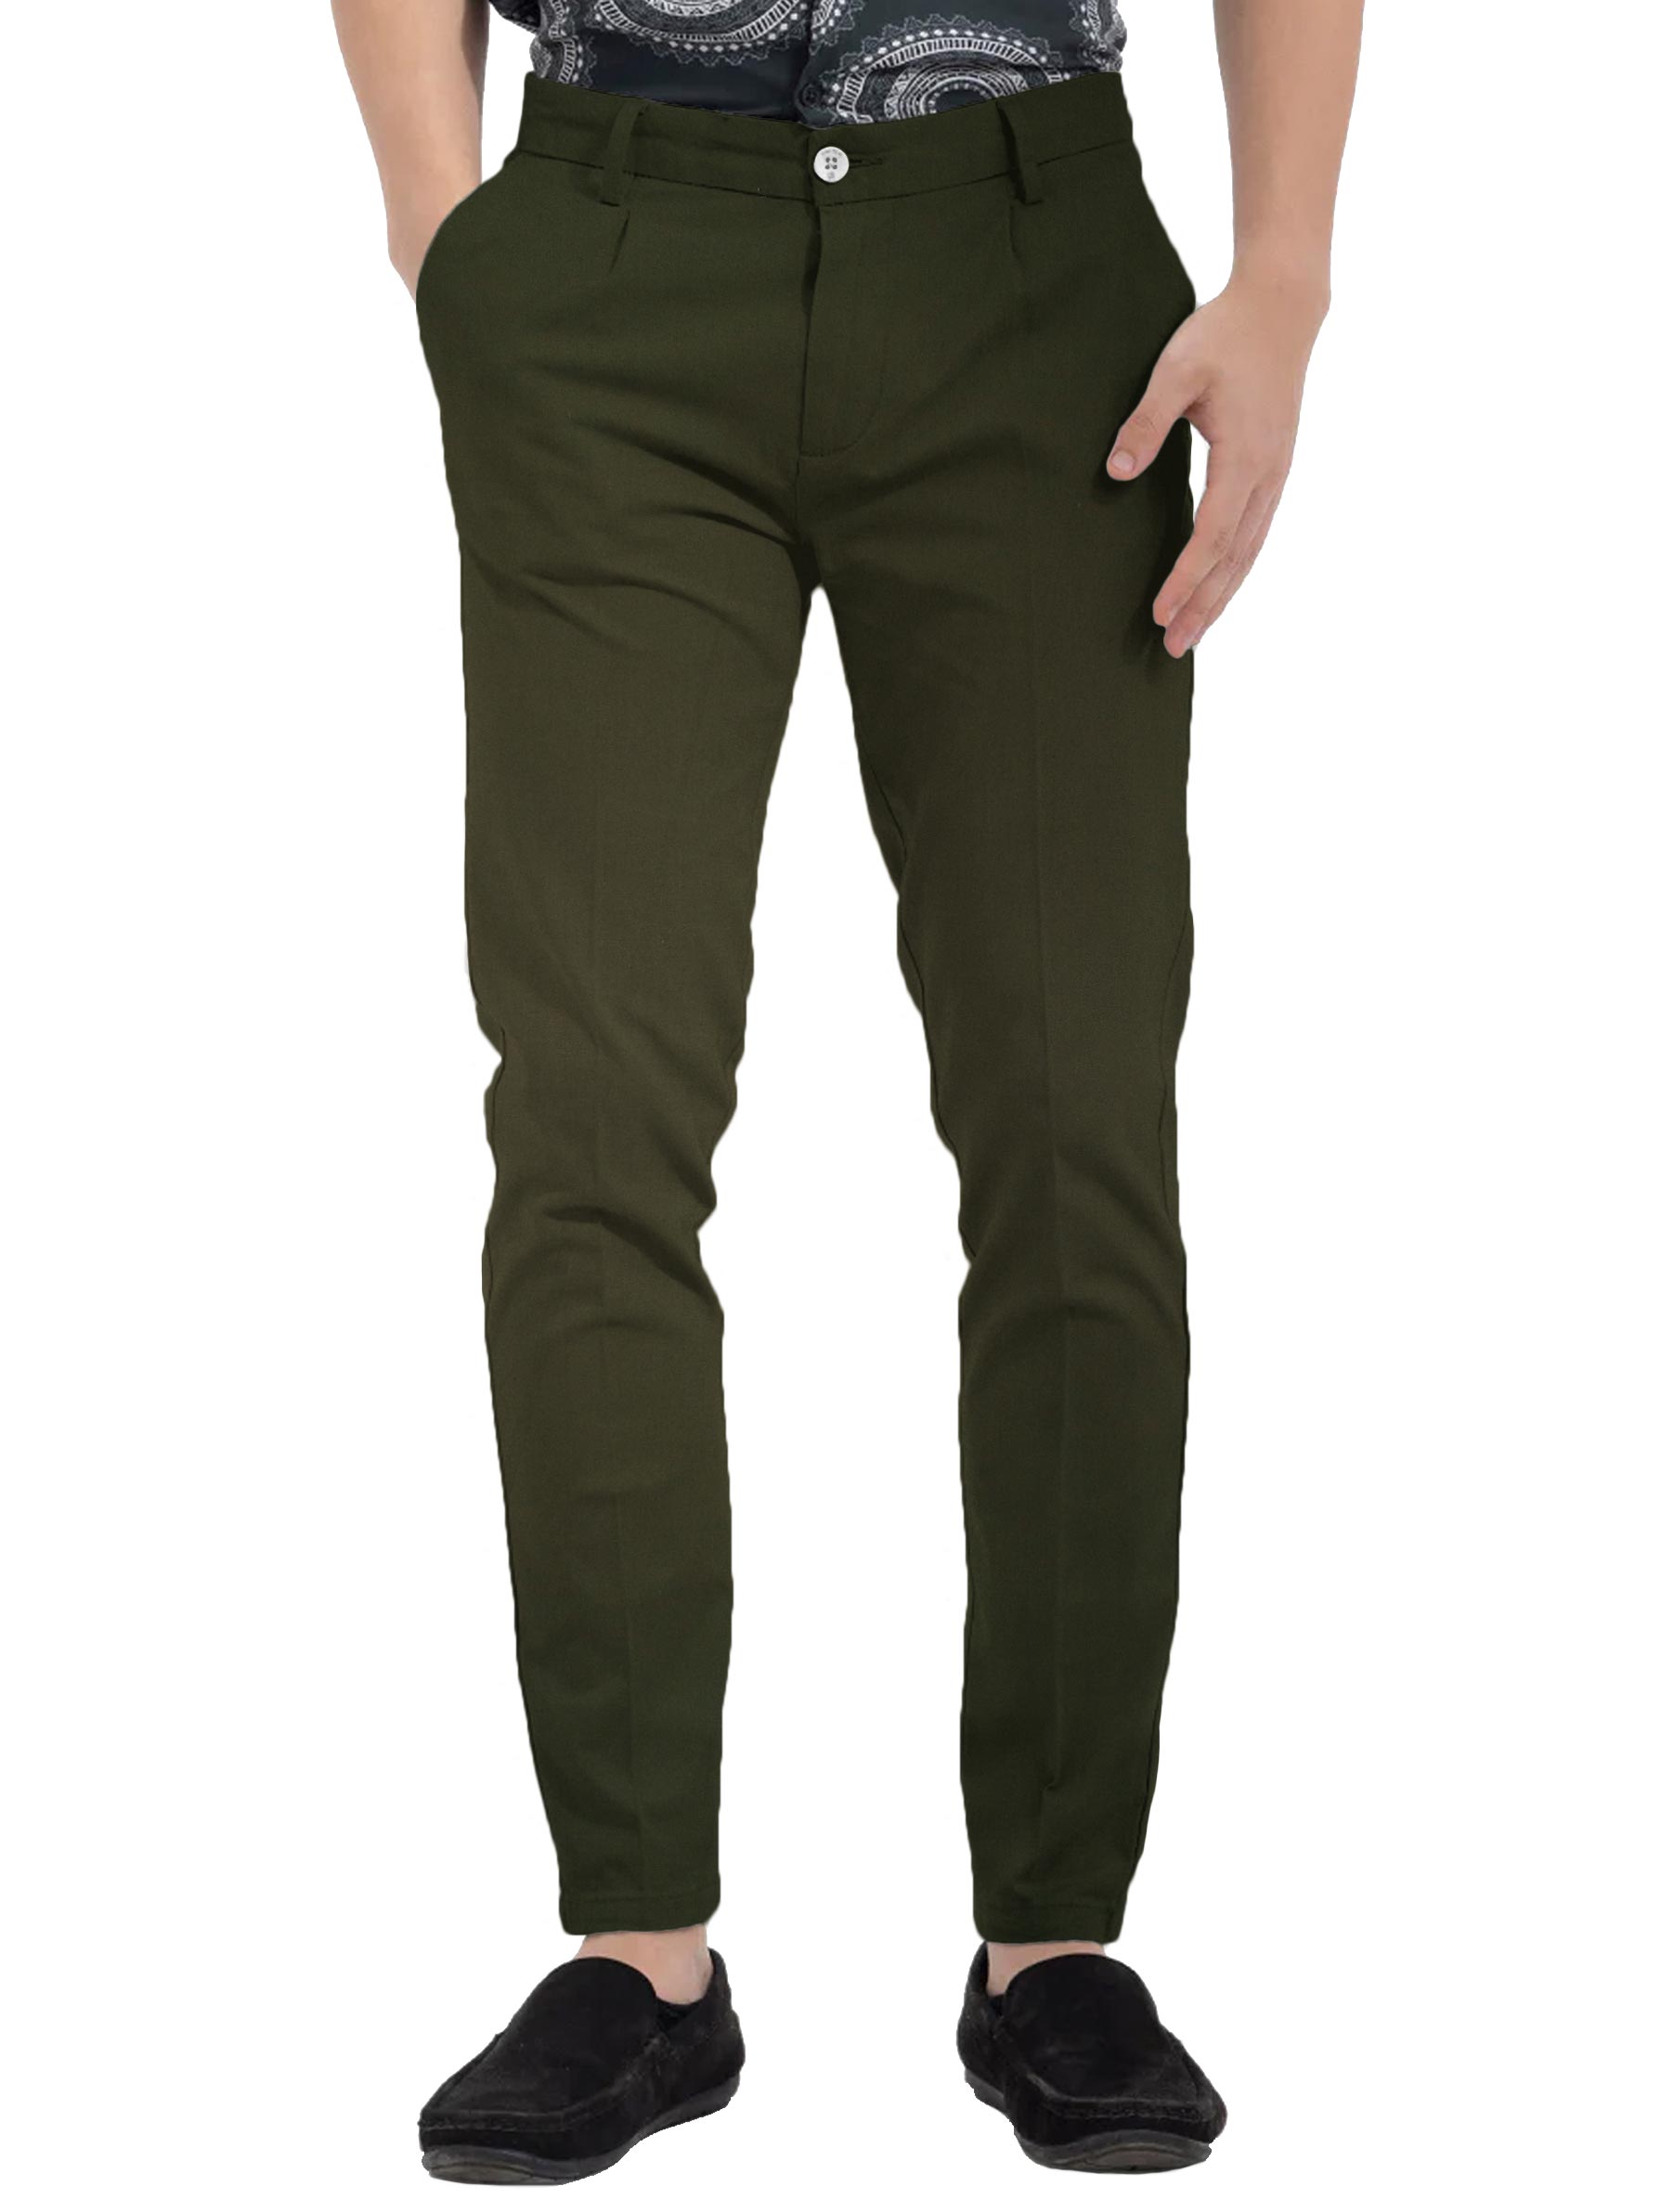 Olive green panttrouser outfits formal men  Olive green pants Trouser  outfits Green pants